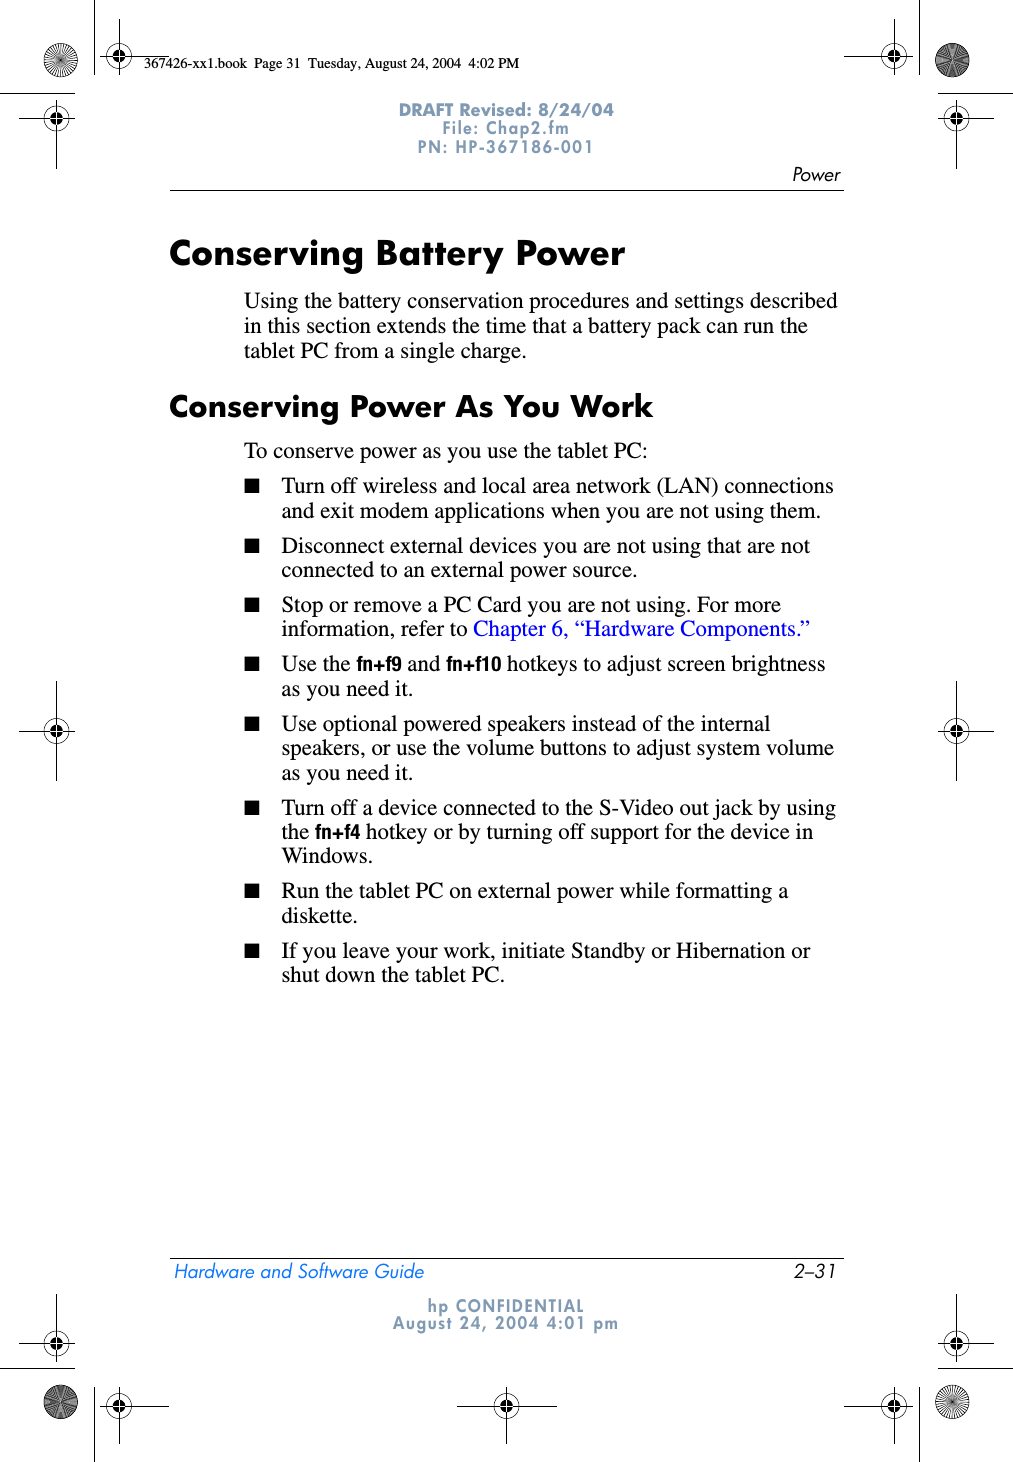 PowerHardware and Software Guide 2–31DRAFT Revised: 8/24/04File: Chap2.fm PN: HP-367186-001 hp CONFIDENTIALAugust 24, 2004 4:01 pmConserving Battery PowerUsing the battery conservation procedures and settings described in this section extends the time that a battery pack can run the tablet PC from a single charge.Conserving Power As You WorkTo conserve power as you use the tablet PC:■Turn off wireless and local area network (LAN) connections and exit modem applications when you are not using them.■Disconnect external devices you are not using that are not connected to an external power source.■Stop or remove a PC Card you are not using. For more information, refer to Chapter 6, “Hardware Components.”■Use the fn+f9 and fn+f10 hotkeys to adjust screen brightness as you need it.■Use optional powered speakers instead of the internal speakers, or use the volume buttons to adjust system volume as you need it.■Turn off a device connected to the S-Video out jack by using the fn+f4 hotkey or by turning off support for the device in Windows.■Run the tablet PC on external power while formatting a diskette.■If you leave your work, initiate Standby or Hibernation or shut down the tablet PC.367426-xx1.book  Page 31  Tuesday, August 24, 2004  4:02 PM